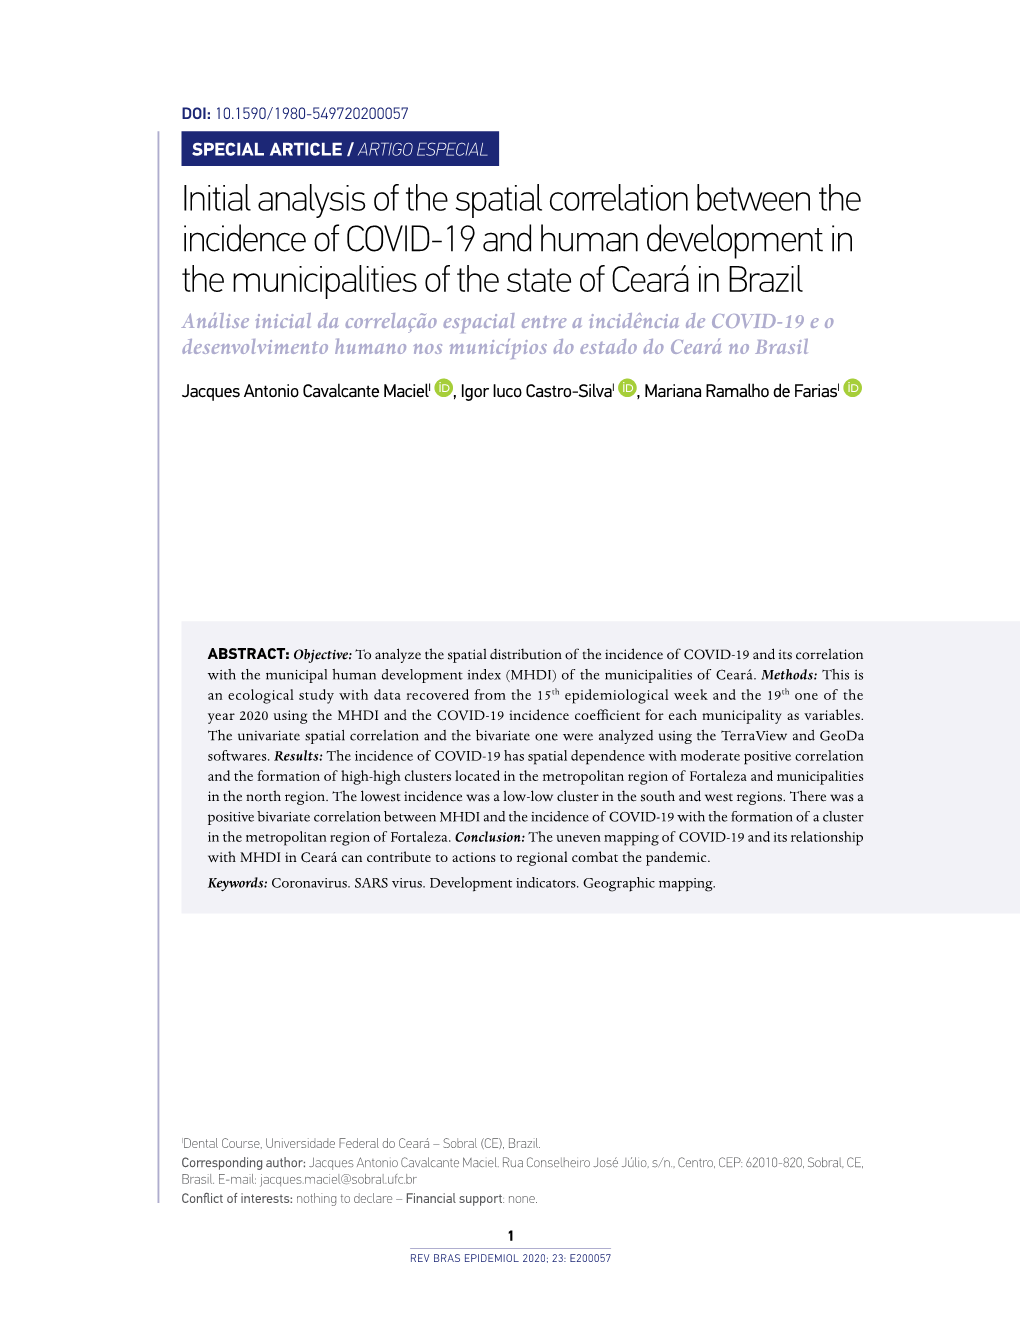 Initial Analysis of the Spatial Correlation Between the Incidence of COVID-19 and Human Development in the Municipalities Of